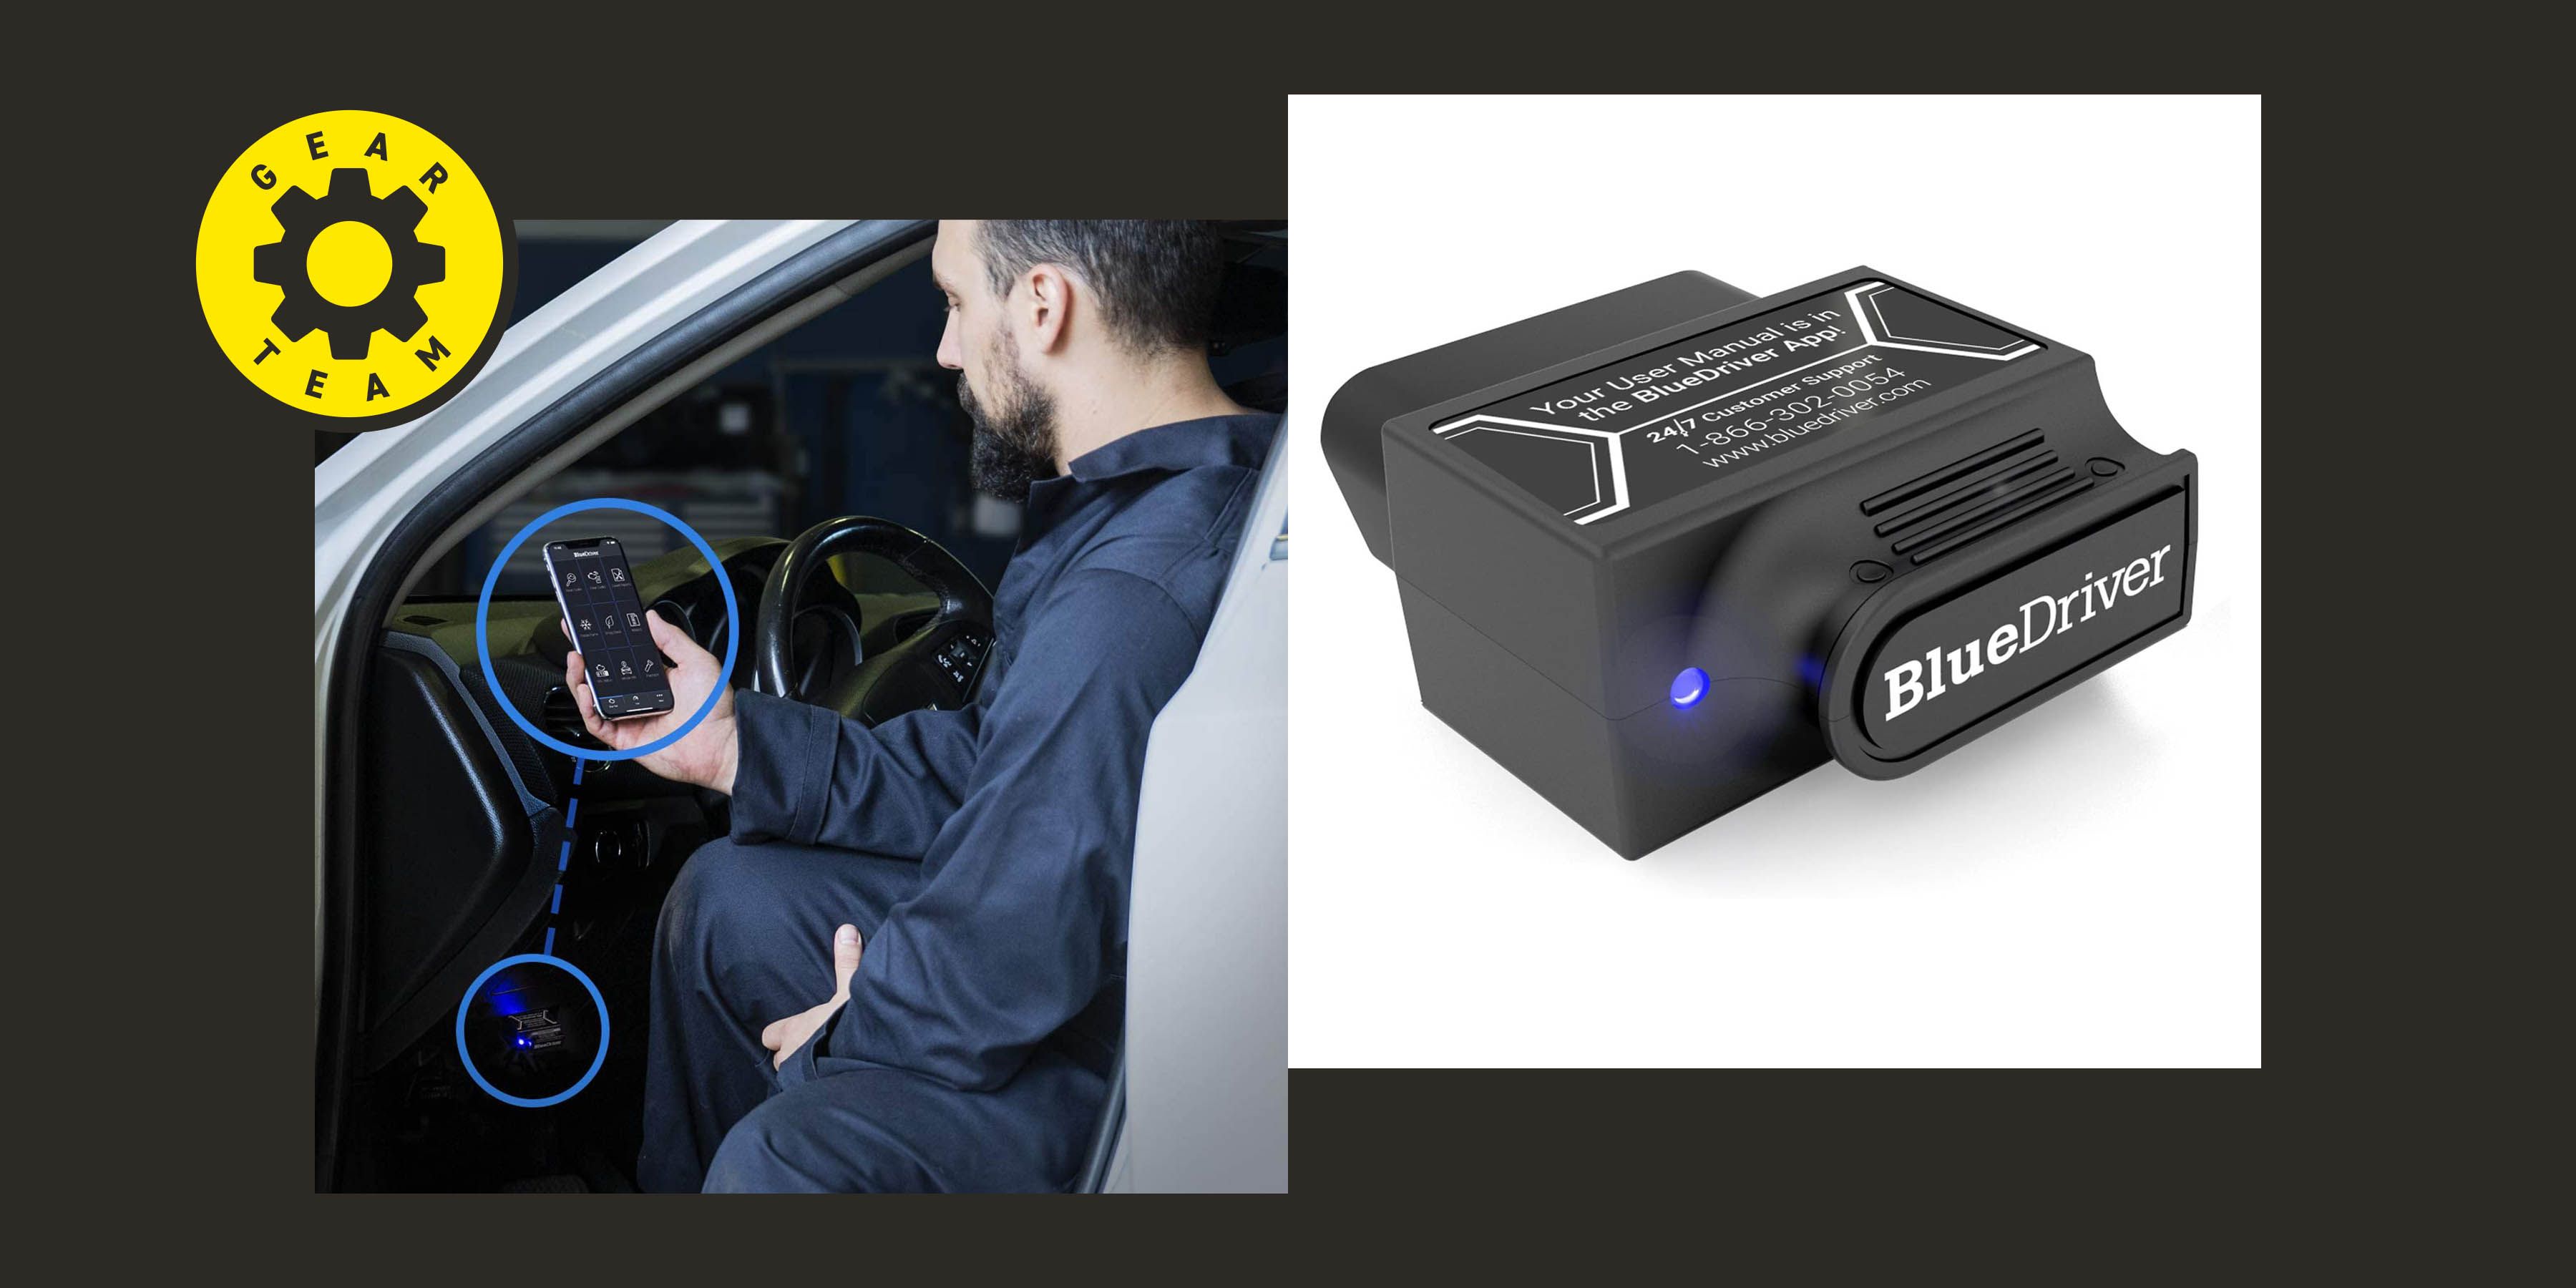 Deformación Publicidad Esquivo These Highly Rated OBD-II Scanners Can Give Your Car a Checkup